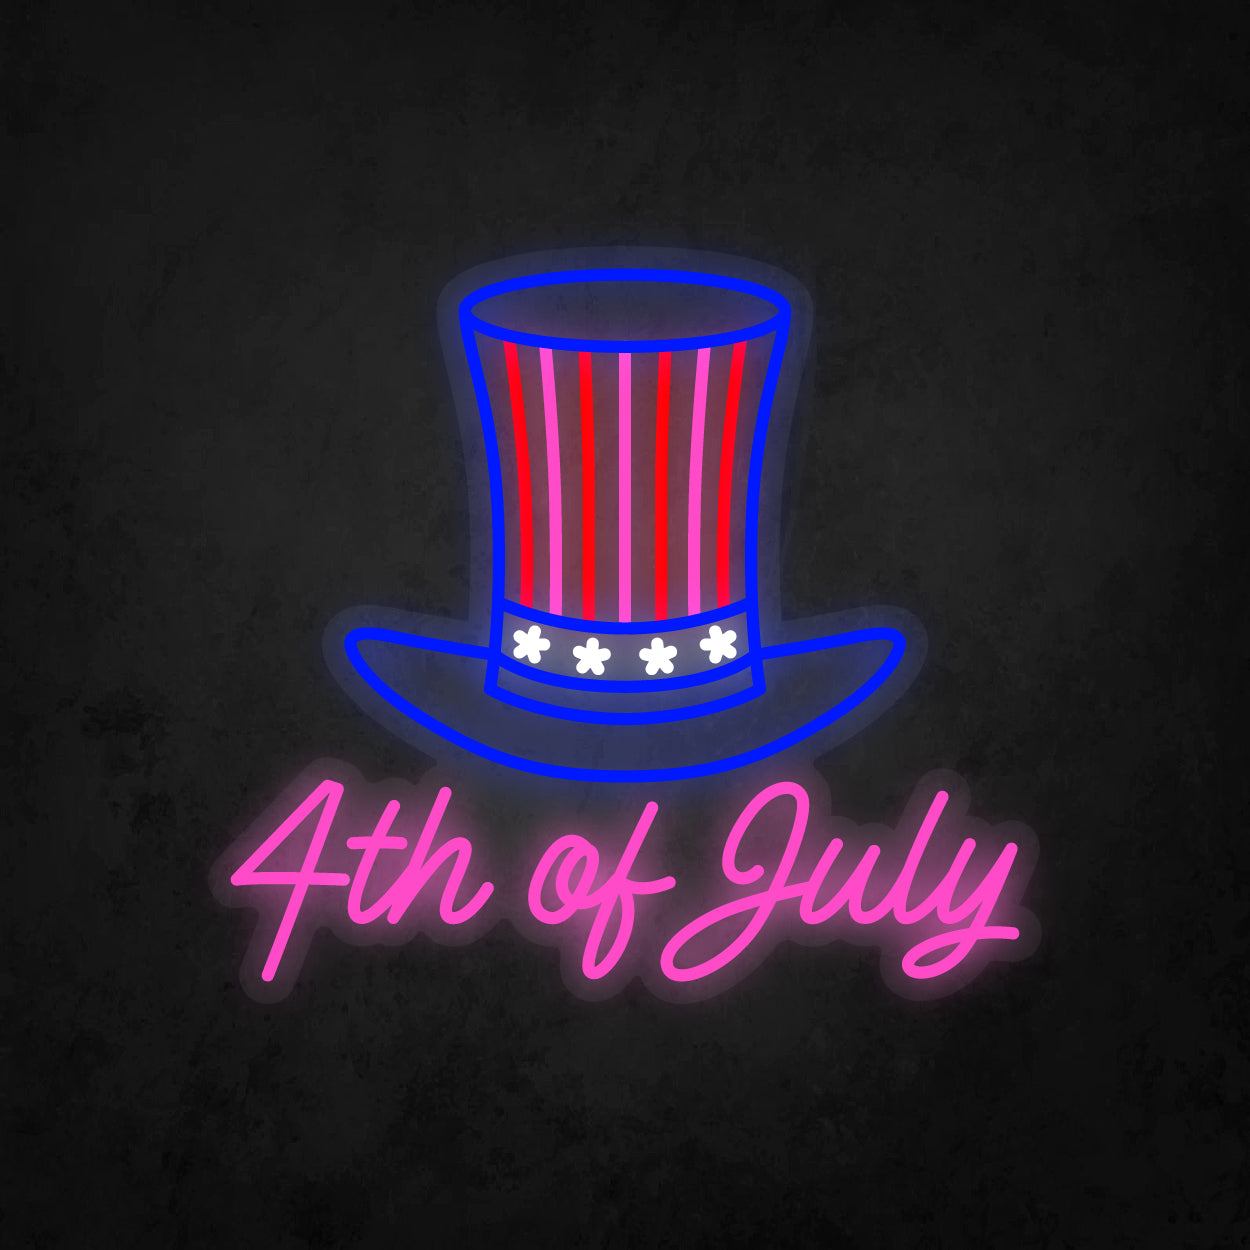 LED Neon Sign - 4th of July and Hat